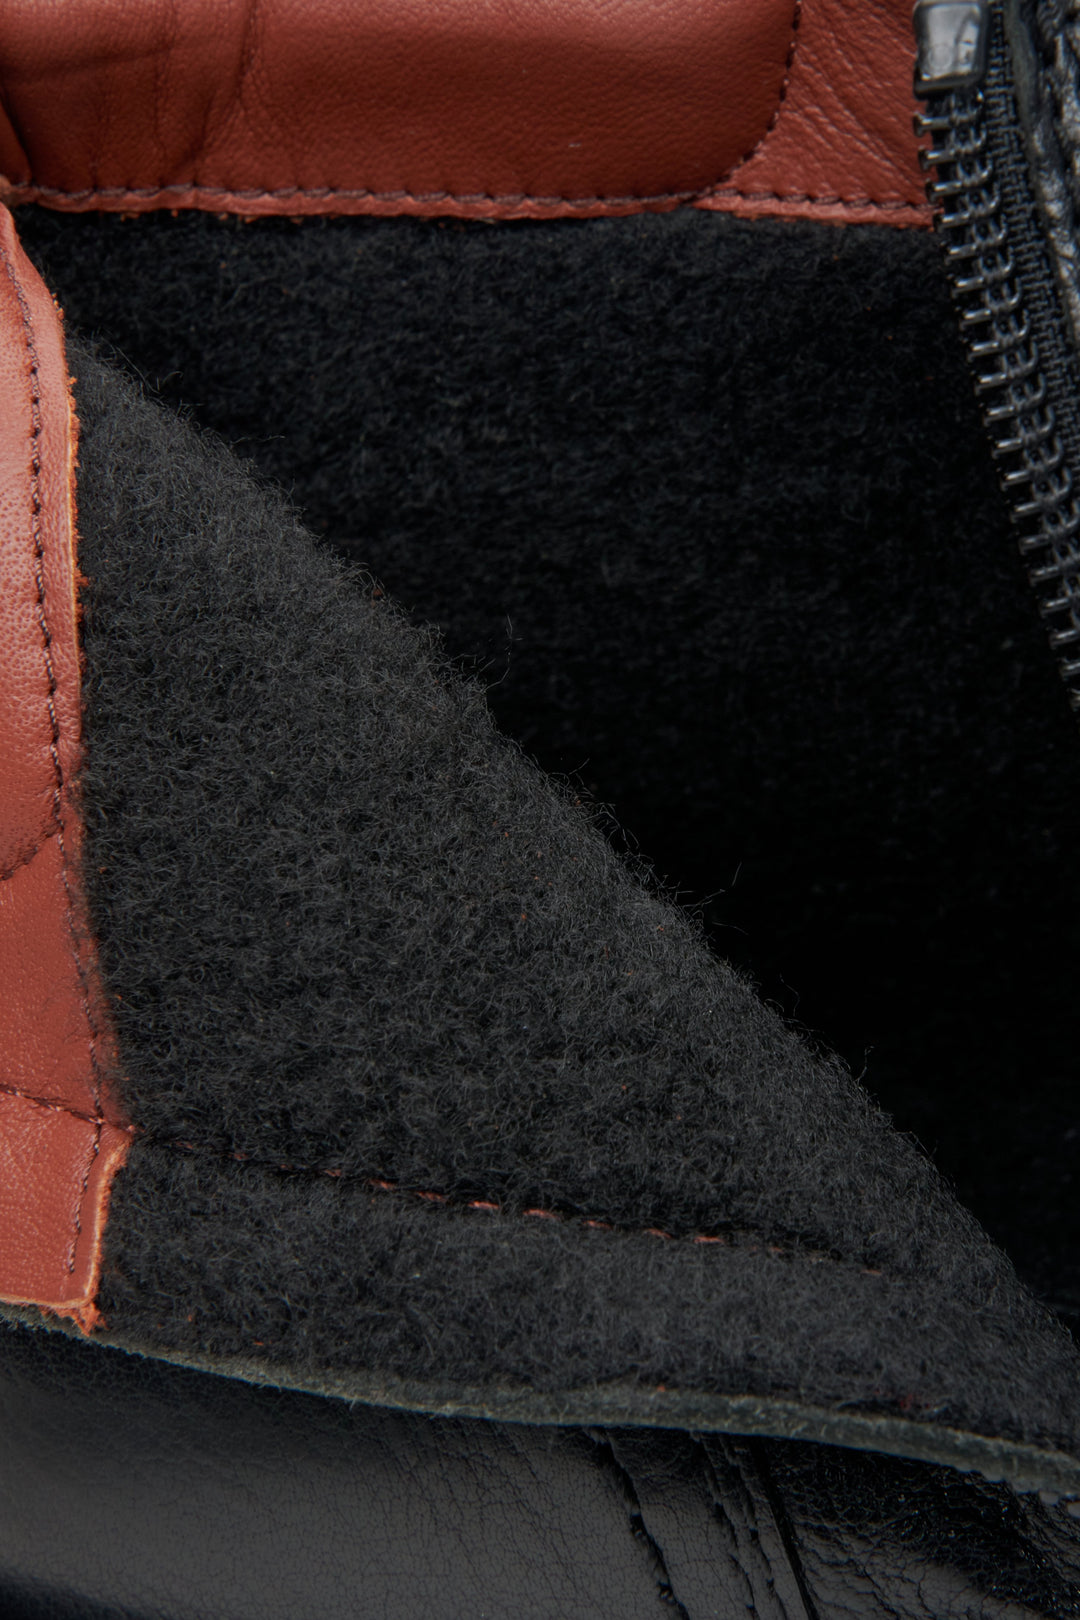  Estro men's boots - close-up of the inside of the shoe.